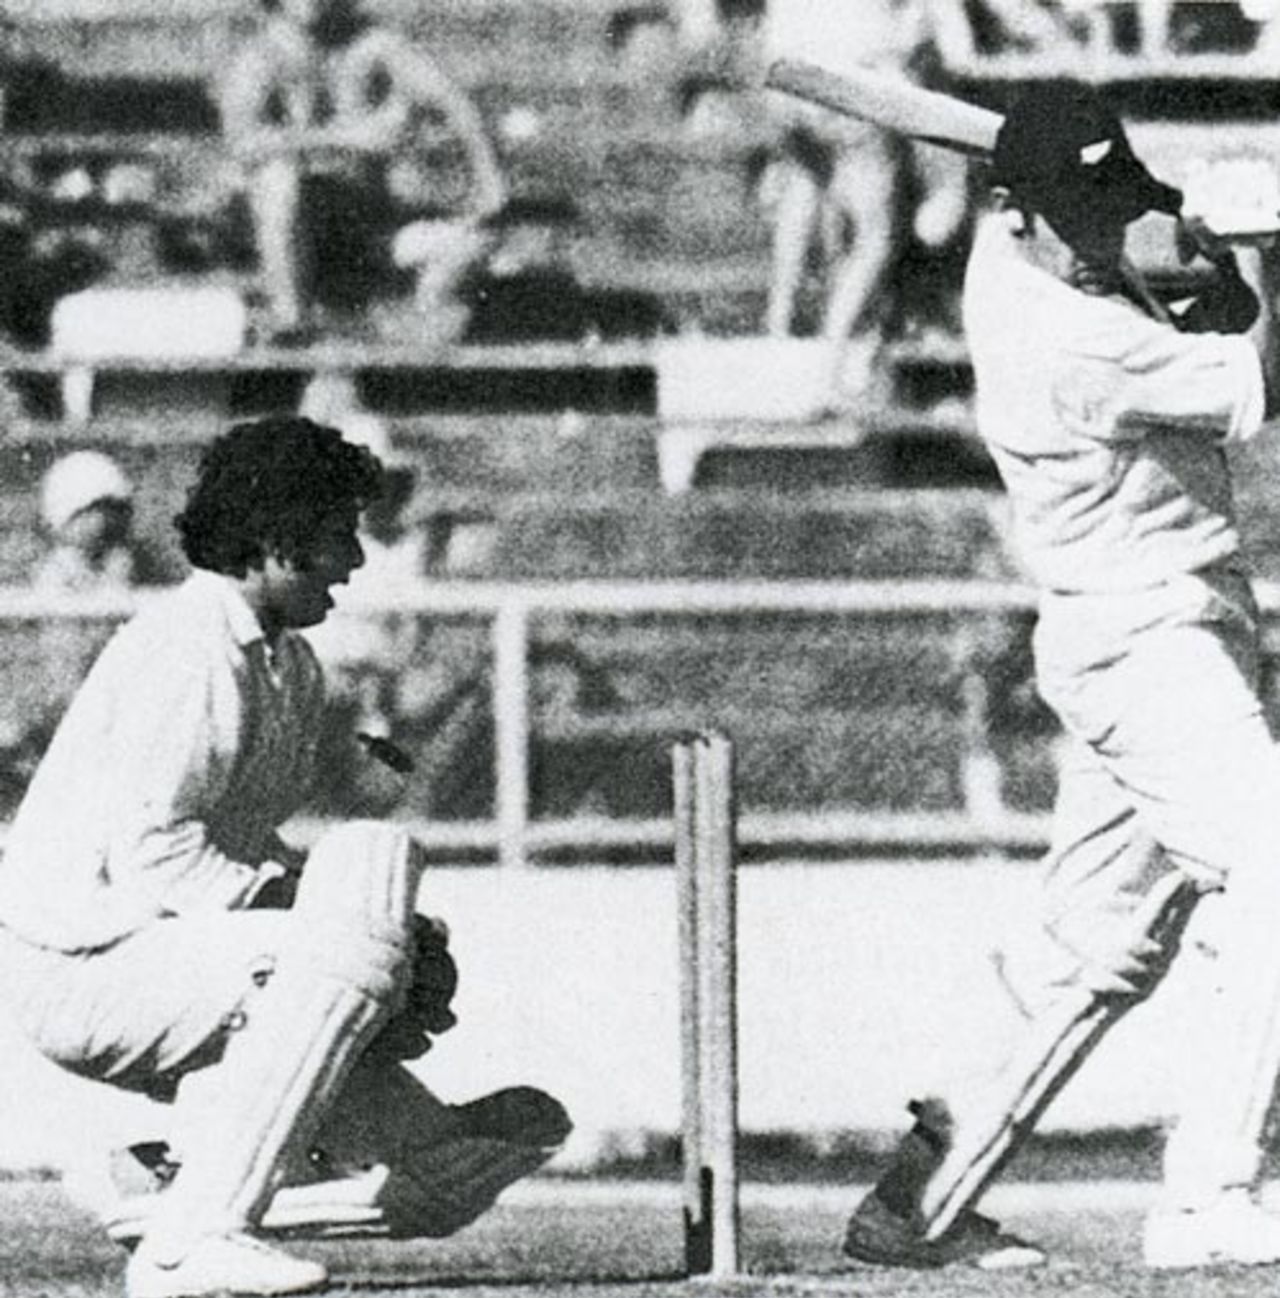 Brian Hastings is bowled to end the Test record 10th-wicket stand of 151, New Zealand v Pakistan,  Auckland, February 17, 1973 